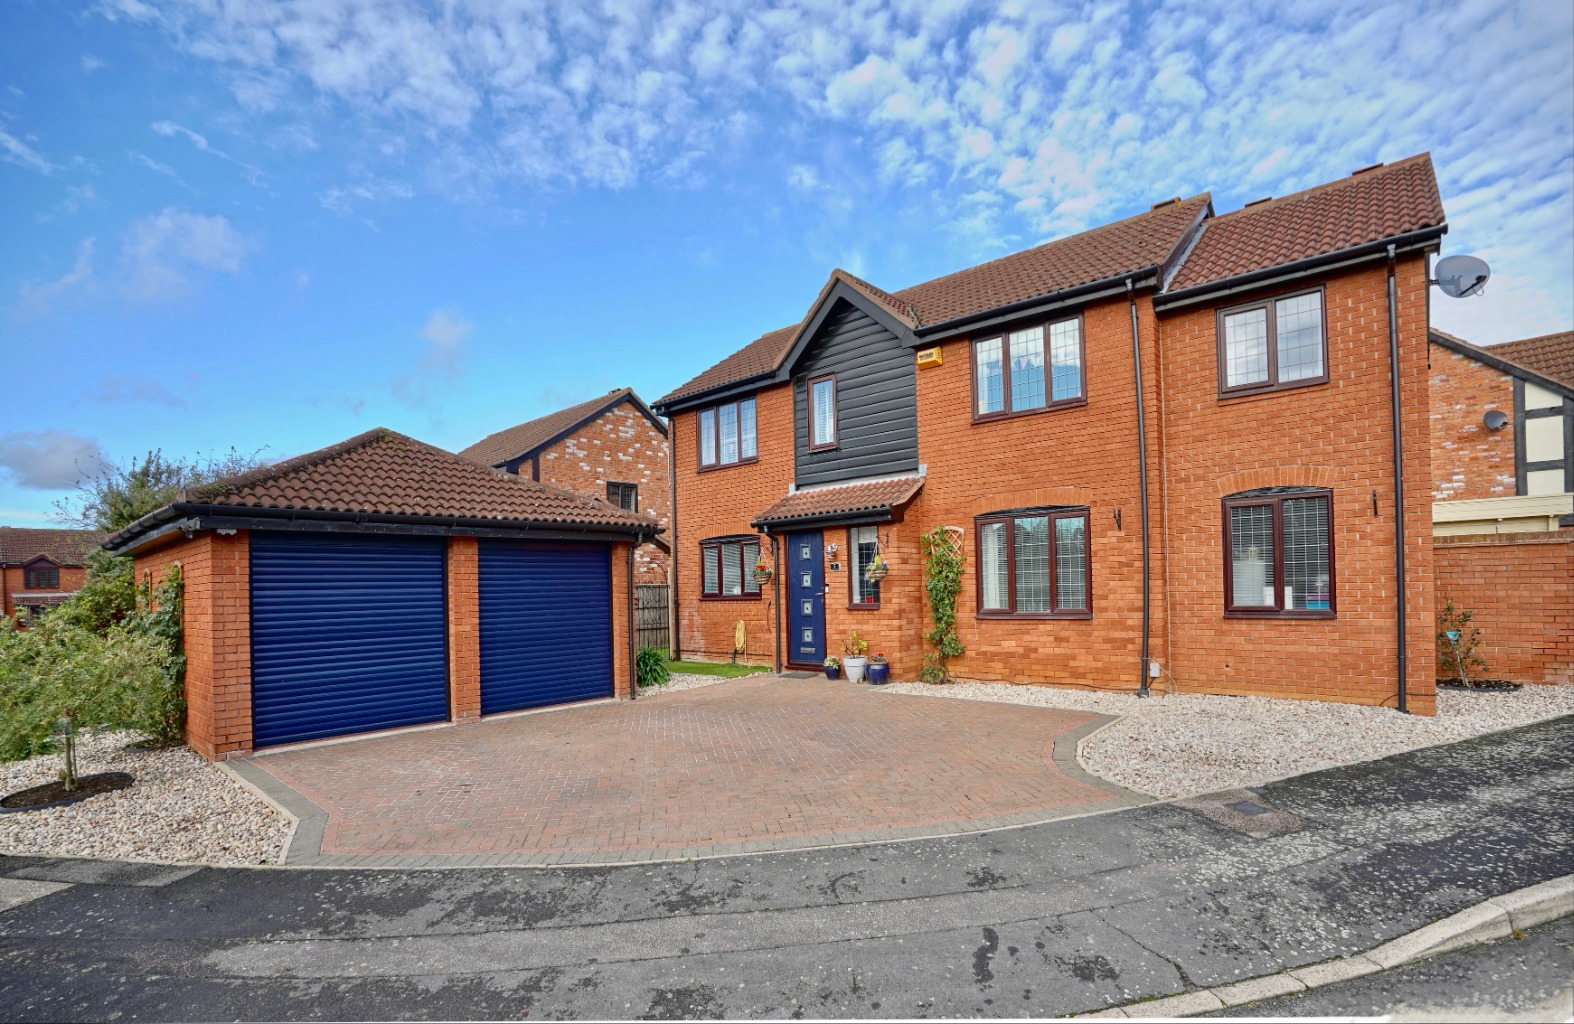 4 bed detached house for sale in Teversham Way, St. Neots - Property Image 1